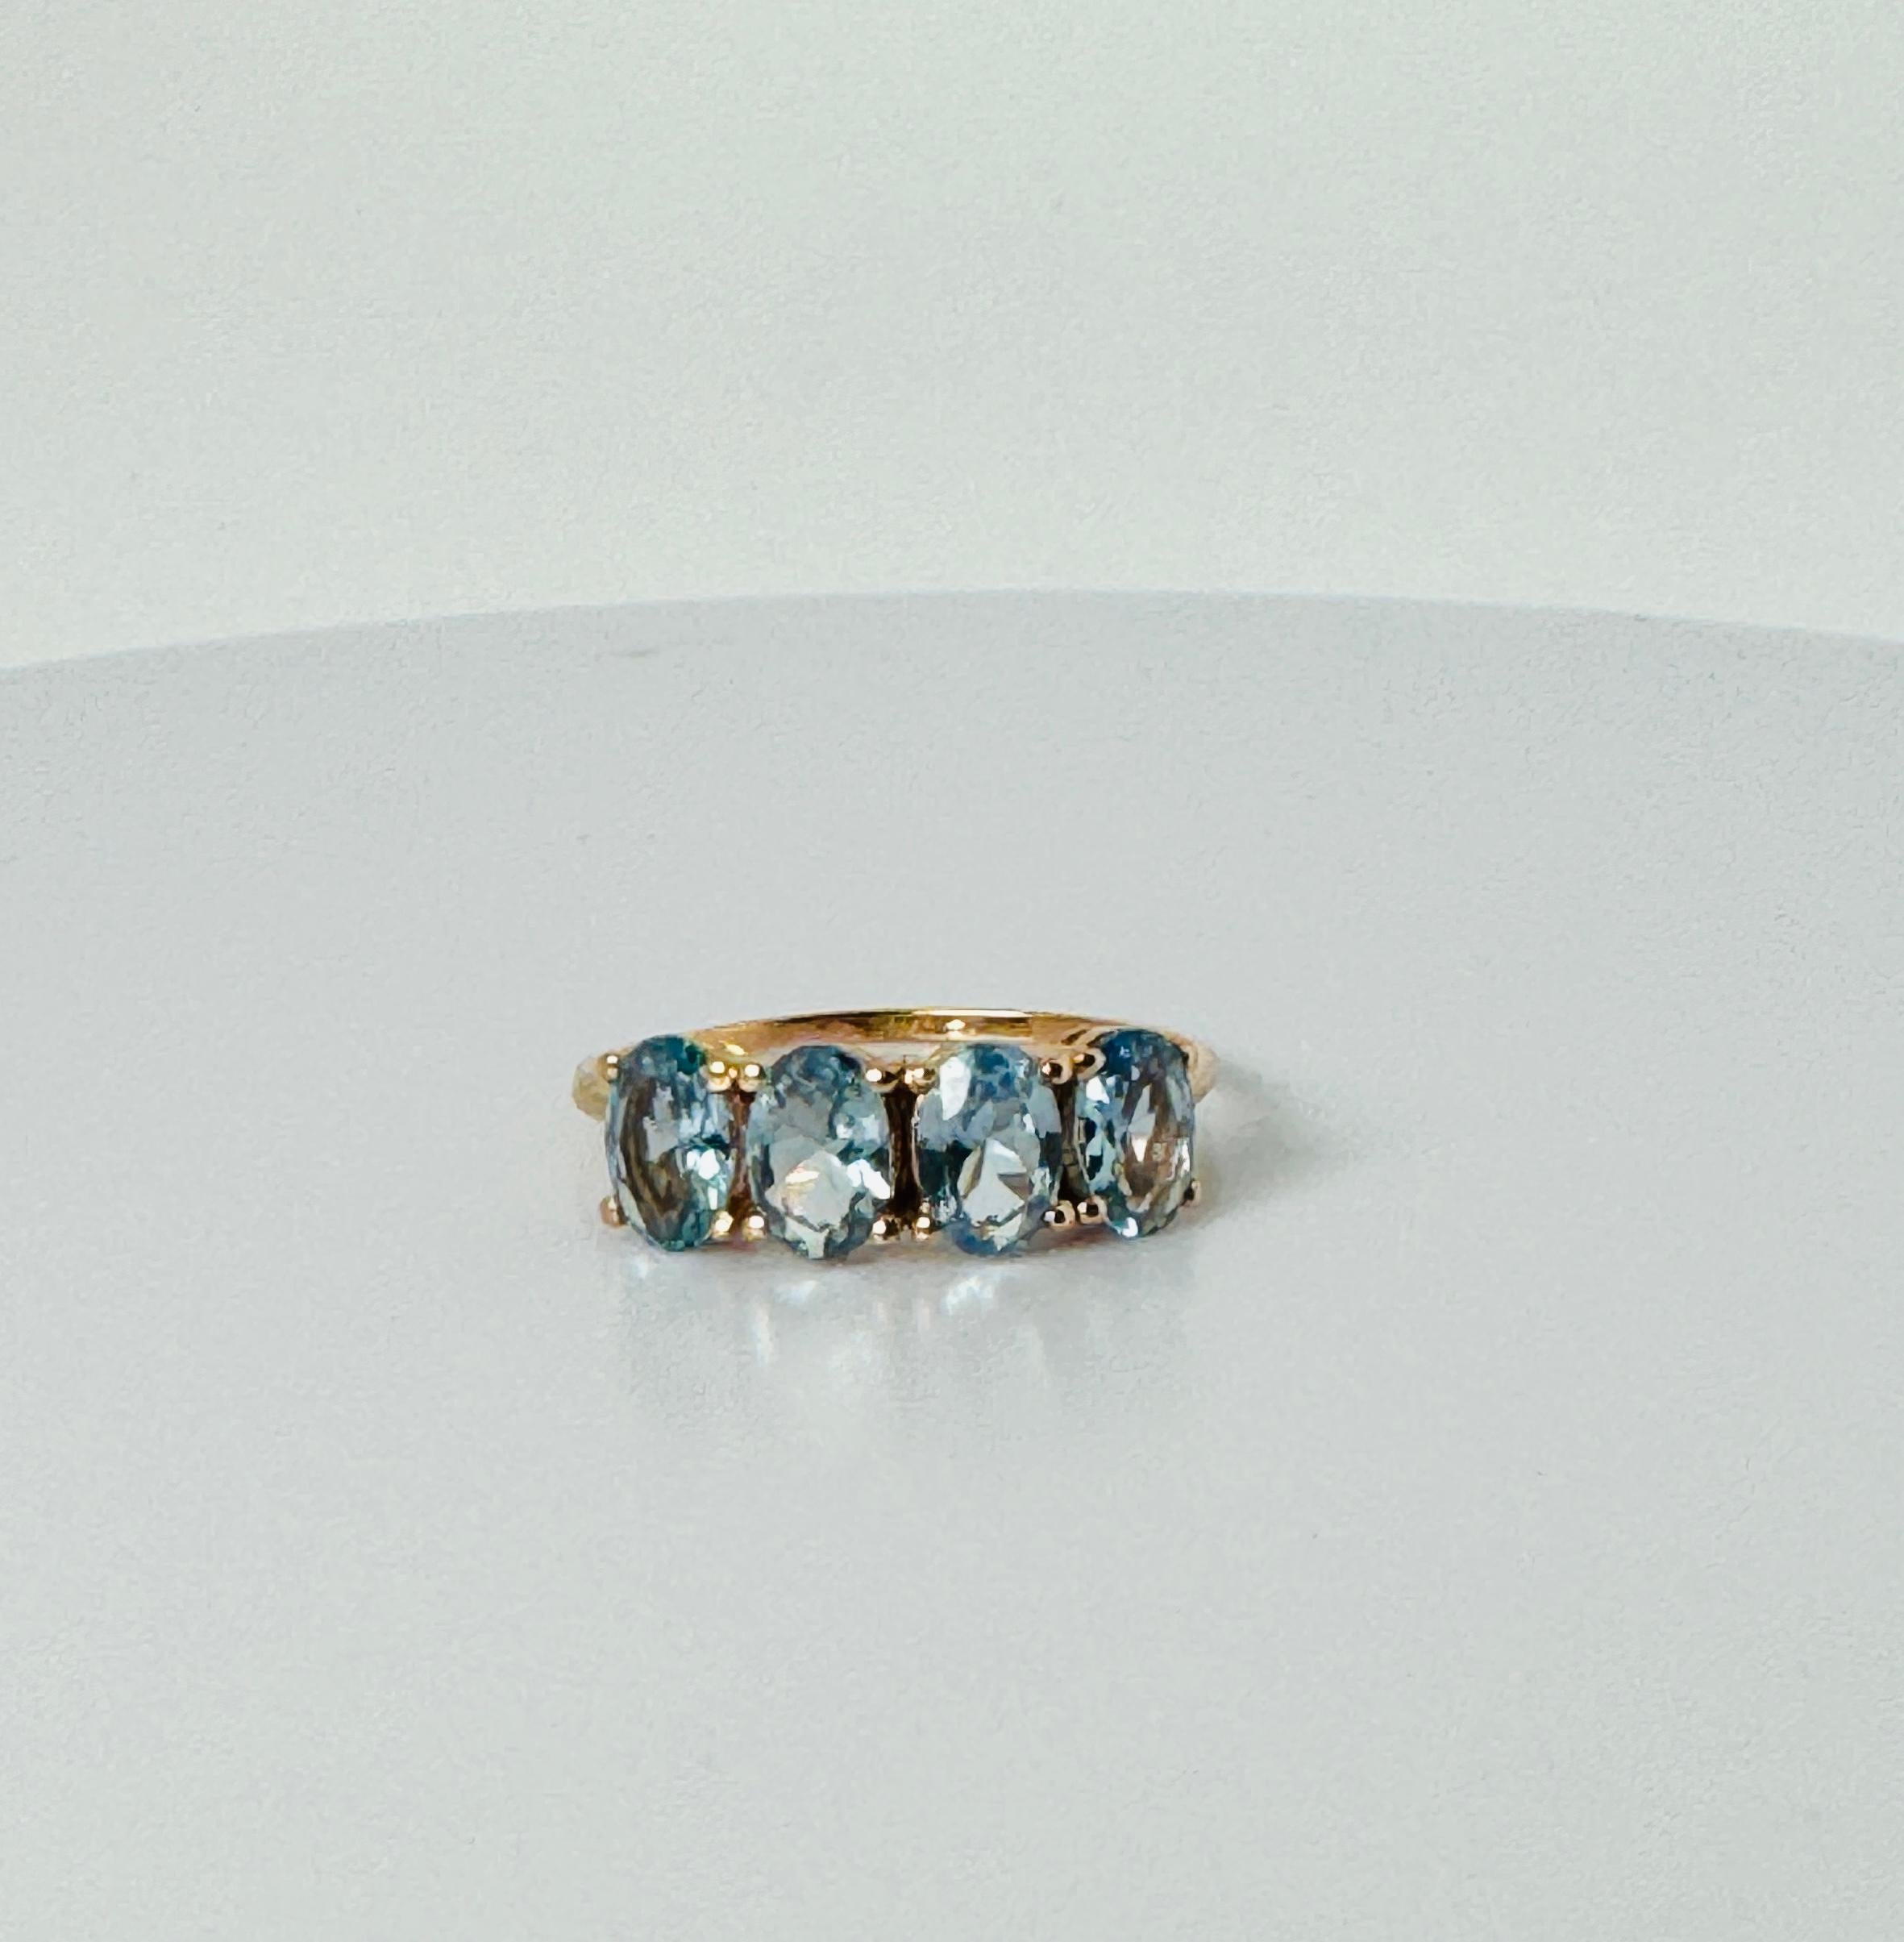 Vintage ring with 4 beautiful oval faceted aquamarines.  This jewel is made of 18 carat red gold. The aquamarines are truly refined and they will for sure sparkle on your finger. This jewel with an European origin is very elegant and is perfectly to